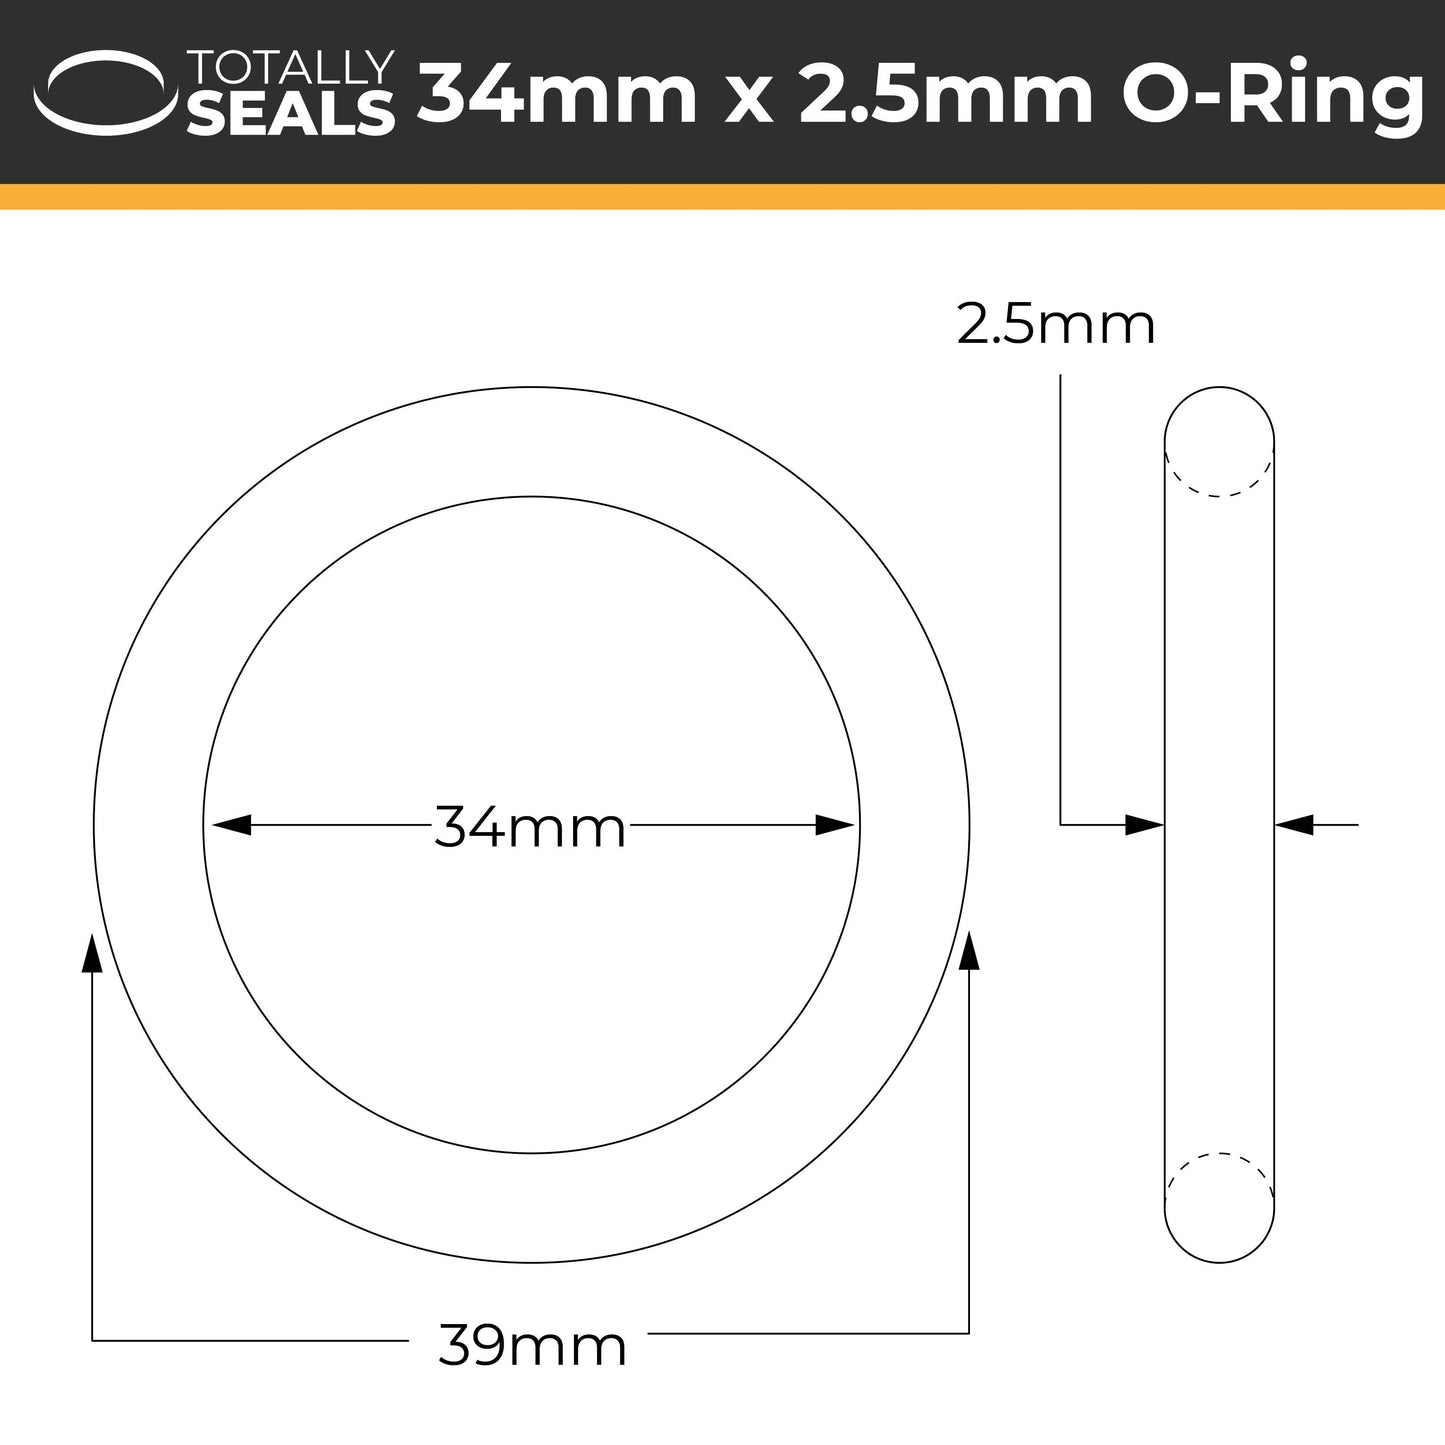 34mm x 2.5mm (39mm OD) Nitrile O-Rings - Totally Seals®